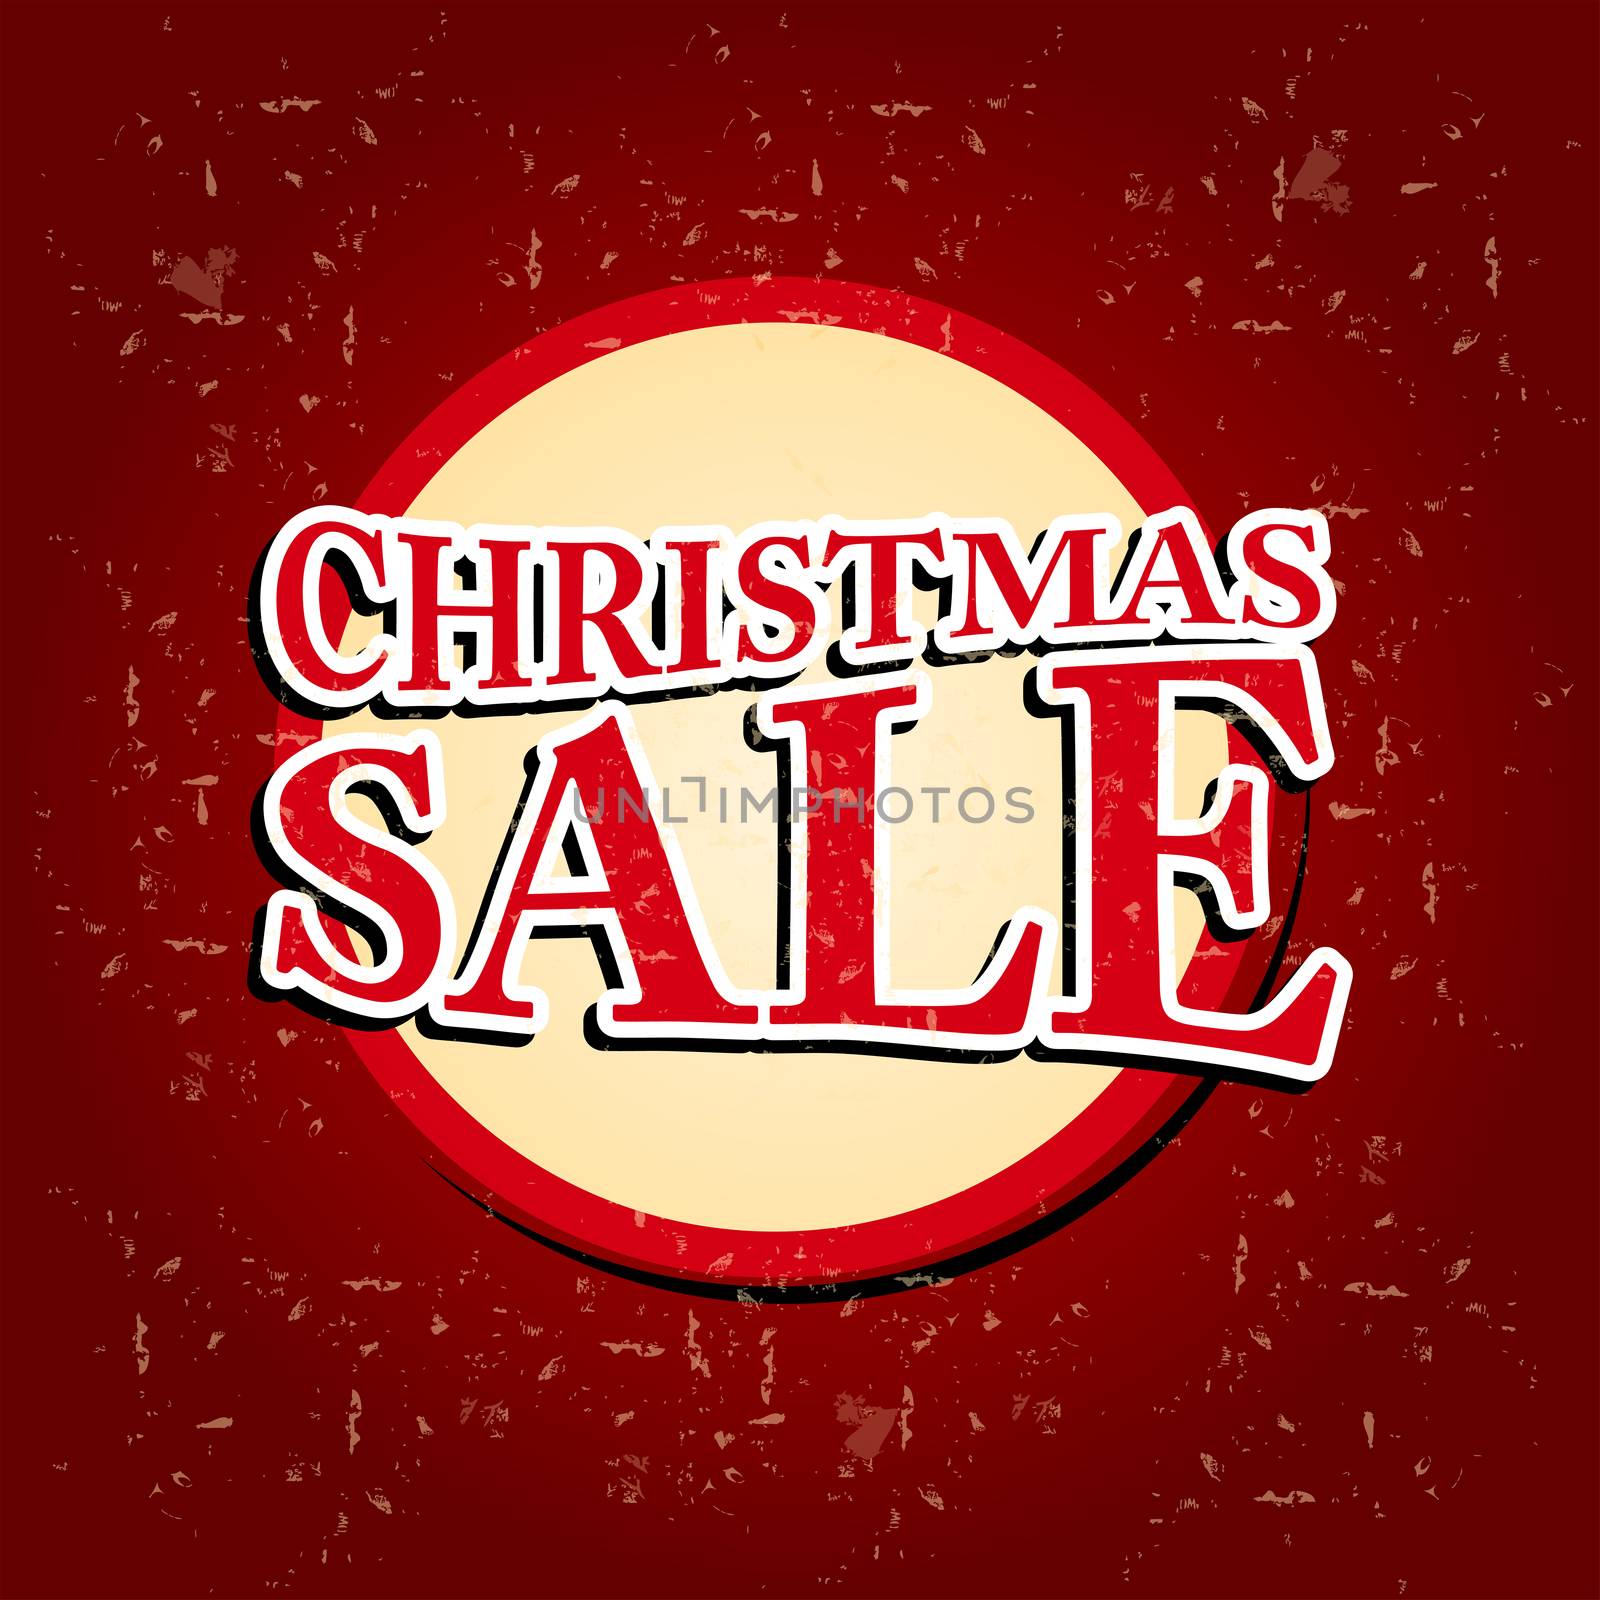 christmas sale - text on circular red banner over old paper background, business holiday concept